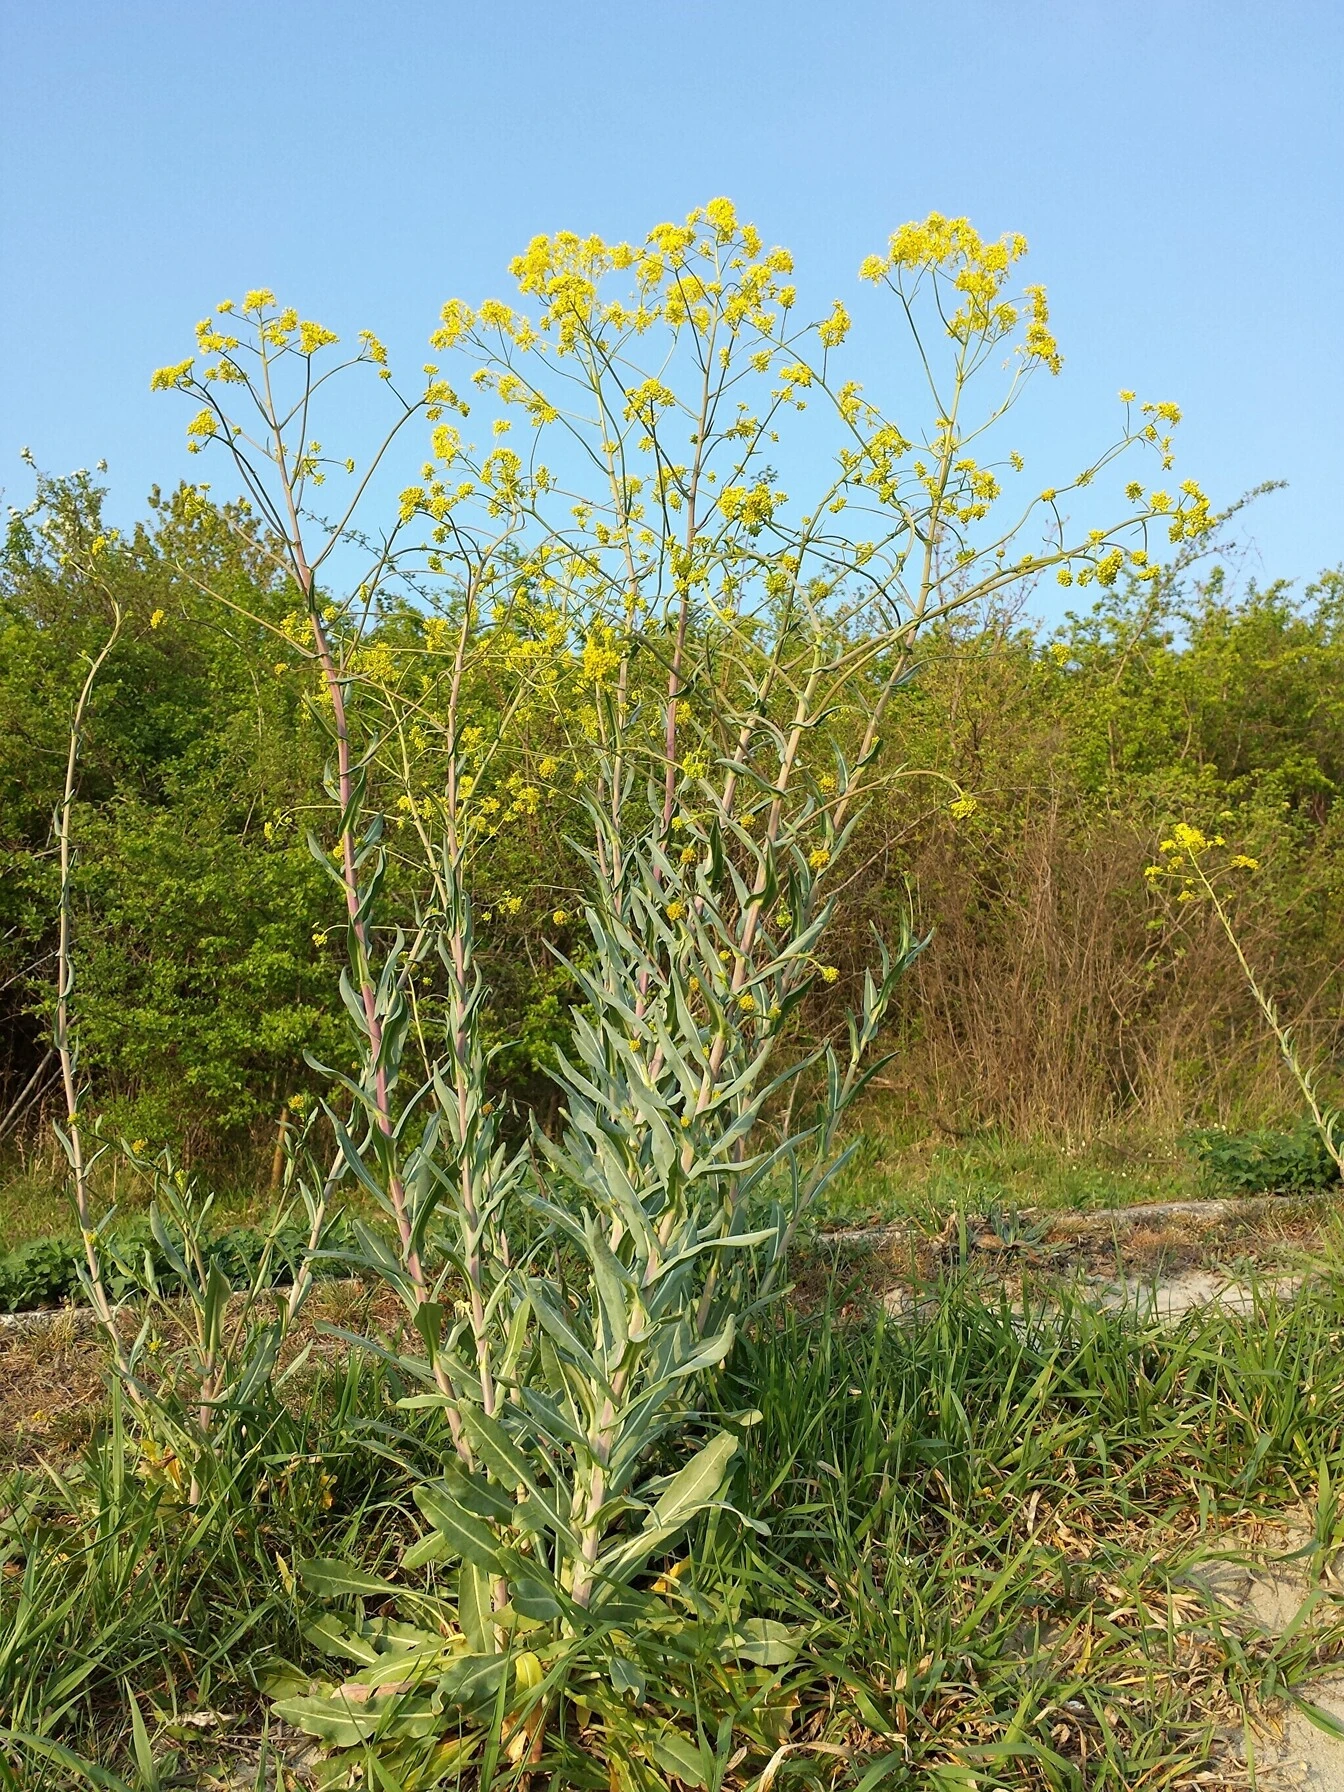 Woad (Isatis tincotria) has been grown all throughout Europe for its importance as a source of blue dye since antiquity.